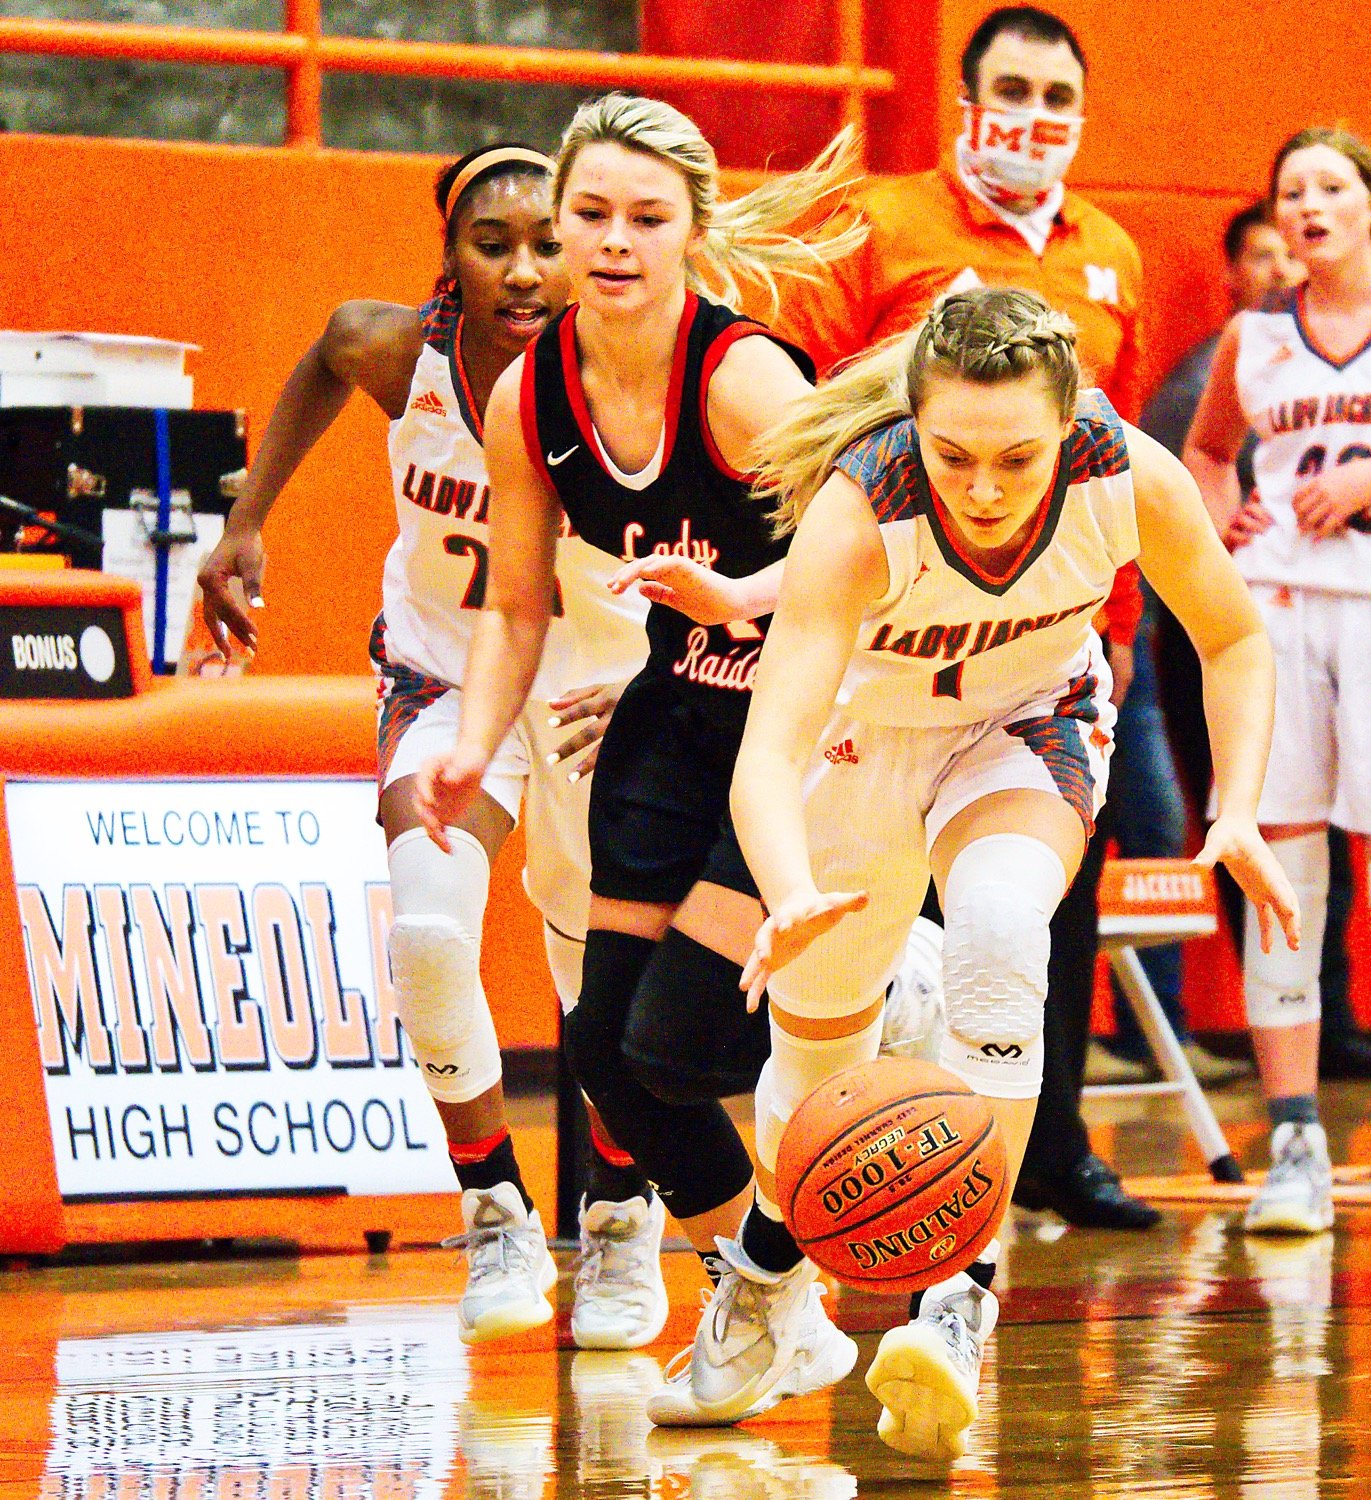 Ava Johnson goes after a loose ball. [shots available to print]